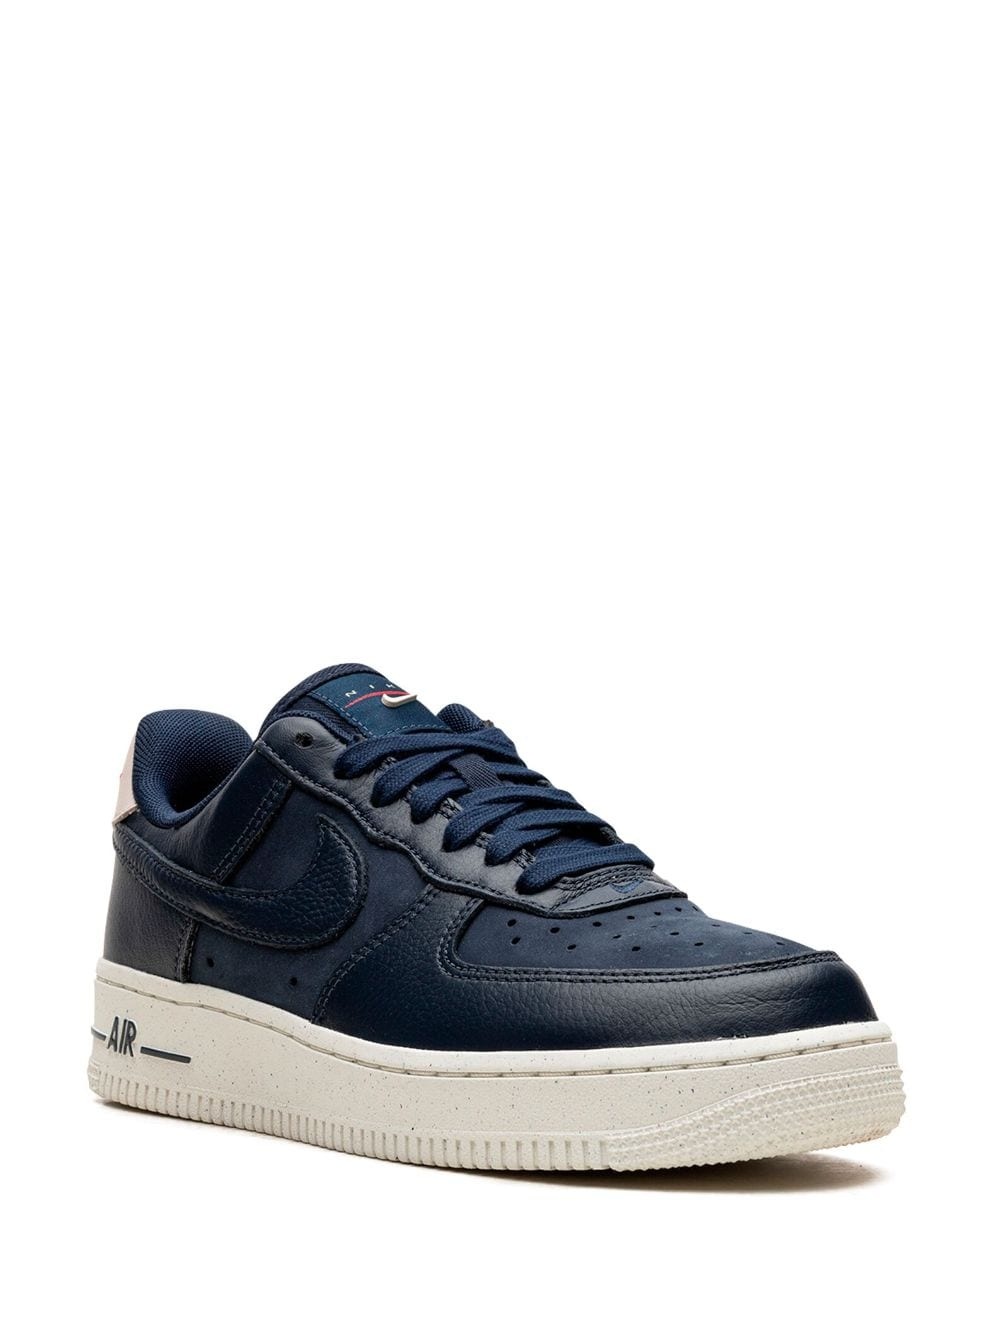 Air Force 1 '07 LX "Obsidian" sneakers - 2